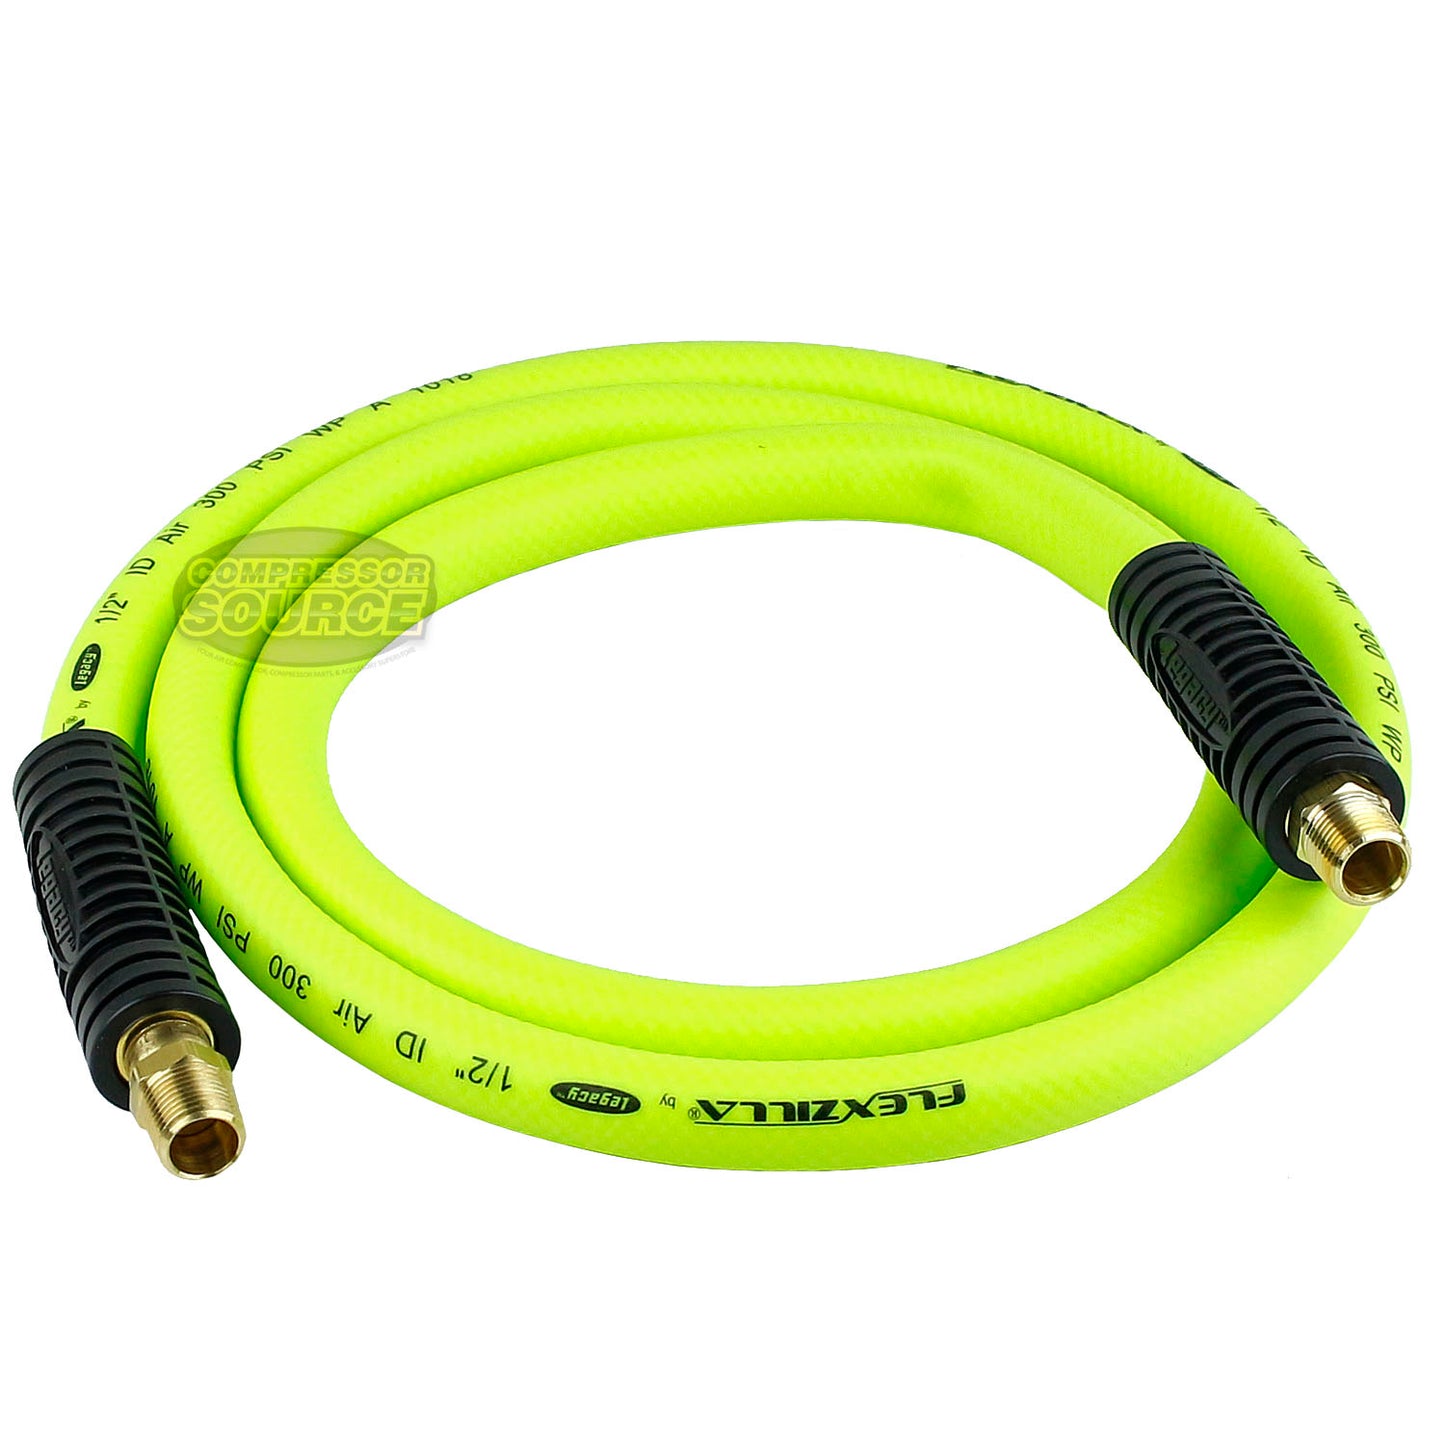 Flexzilla 1/2" x 6' FT Air Hose Whip With 3/8' MNPT Swivel HFZ1206YW3S